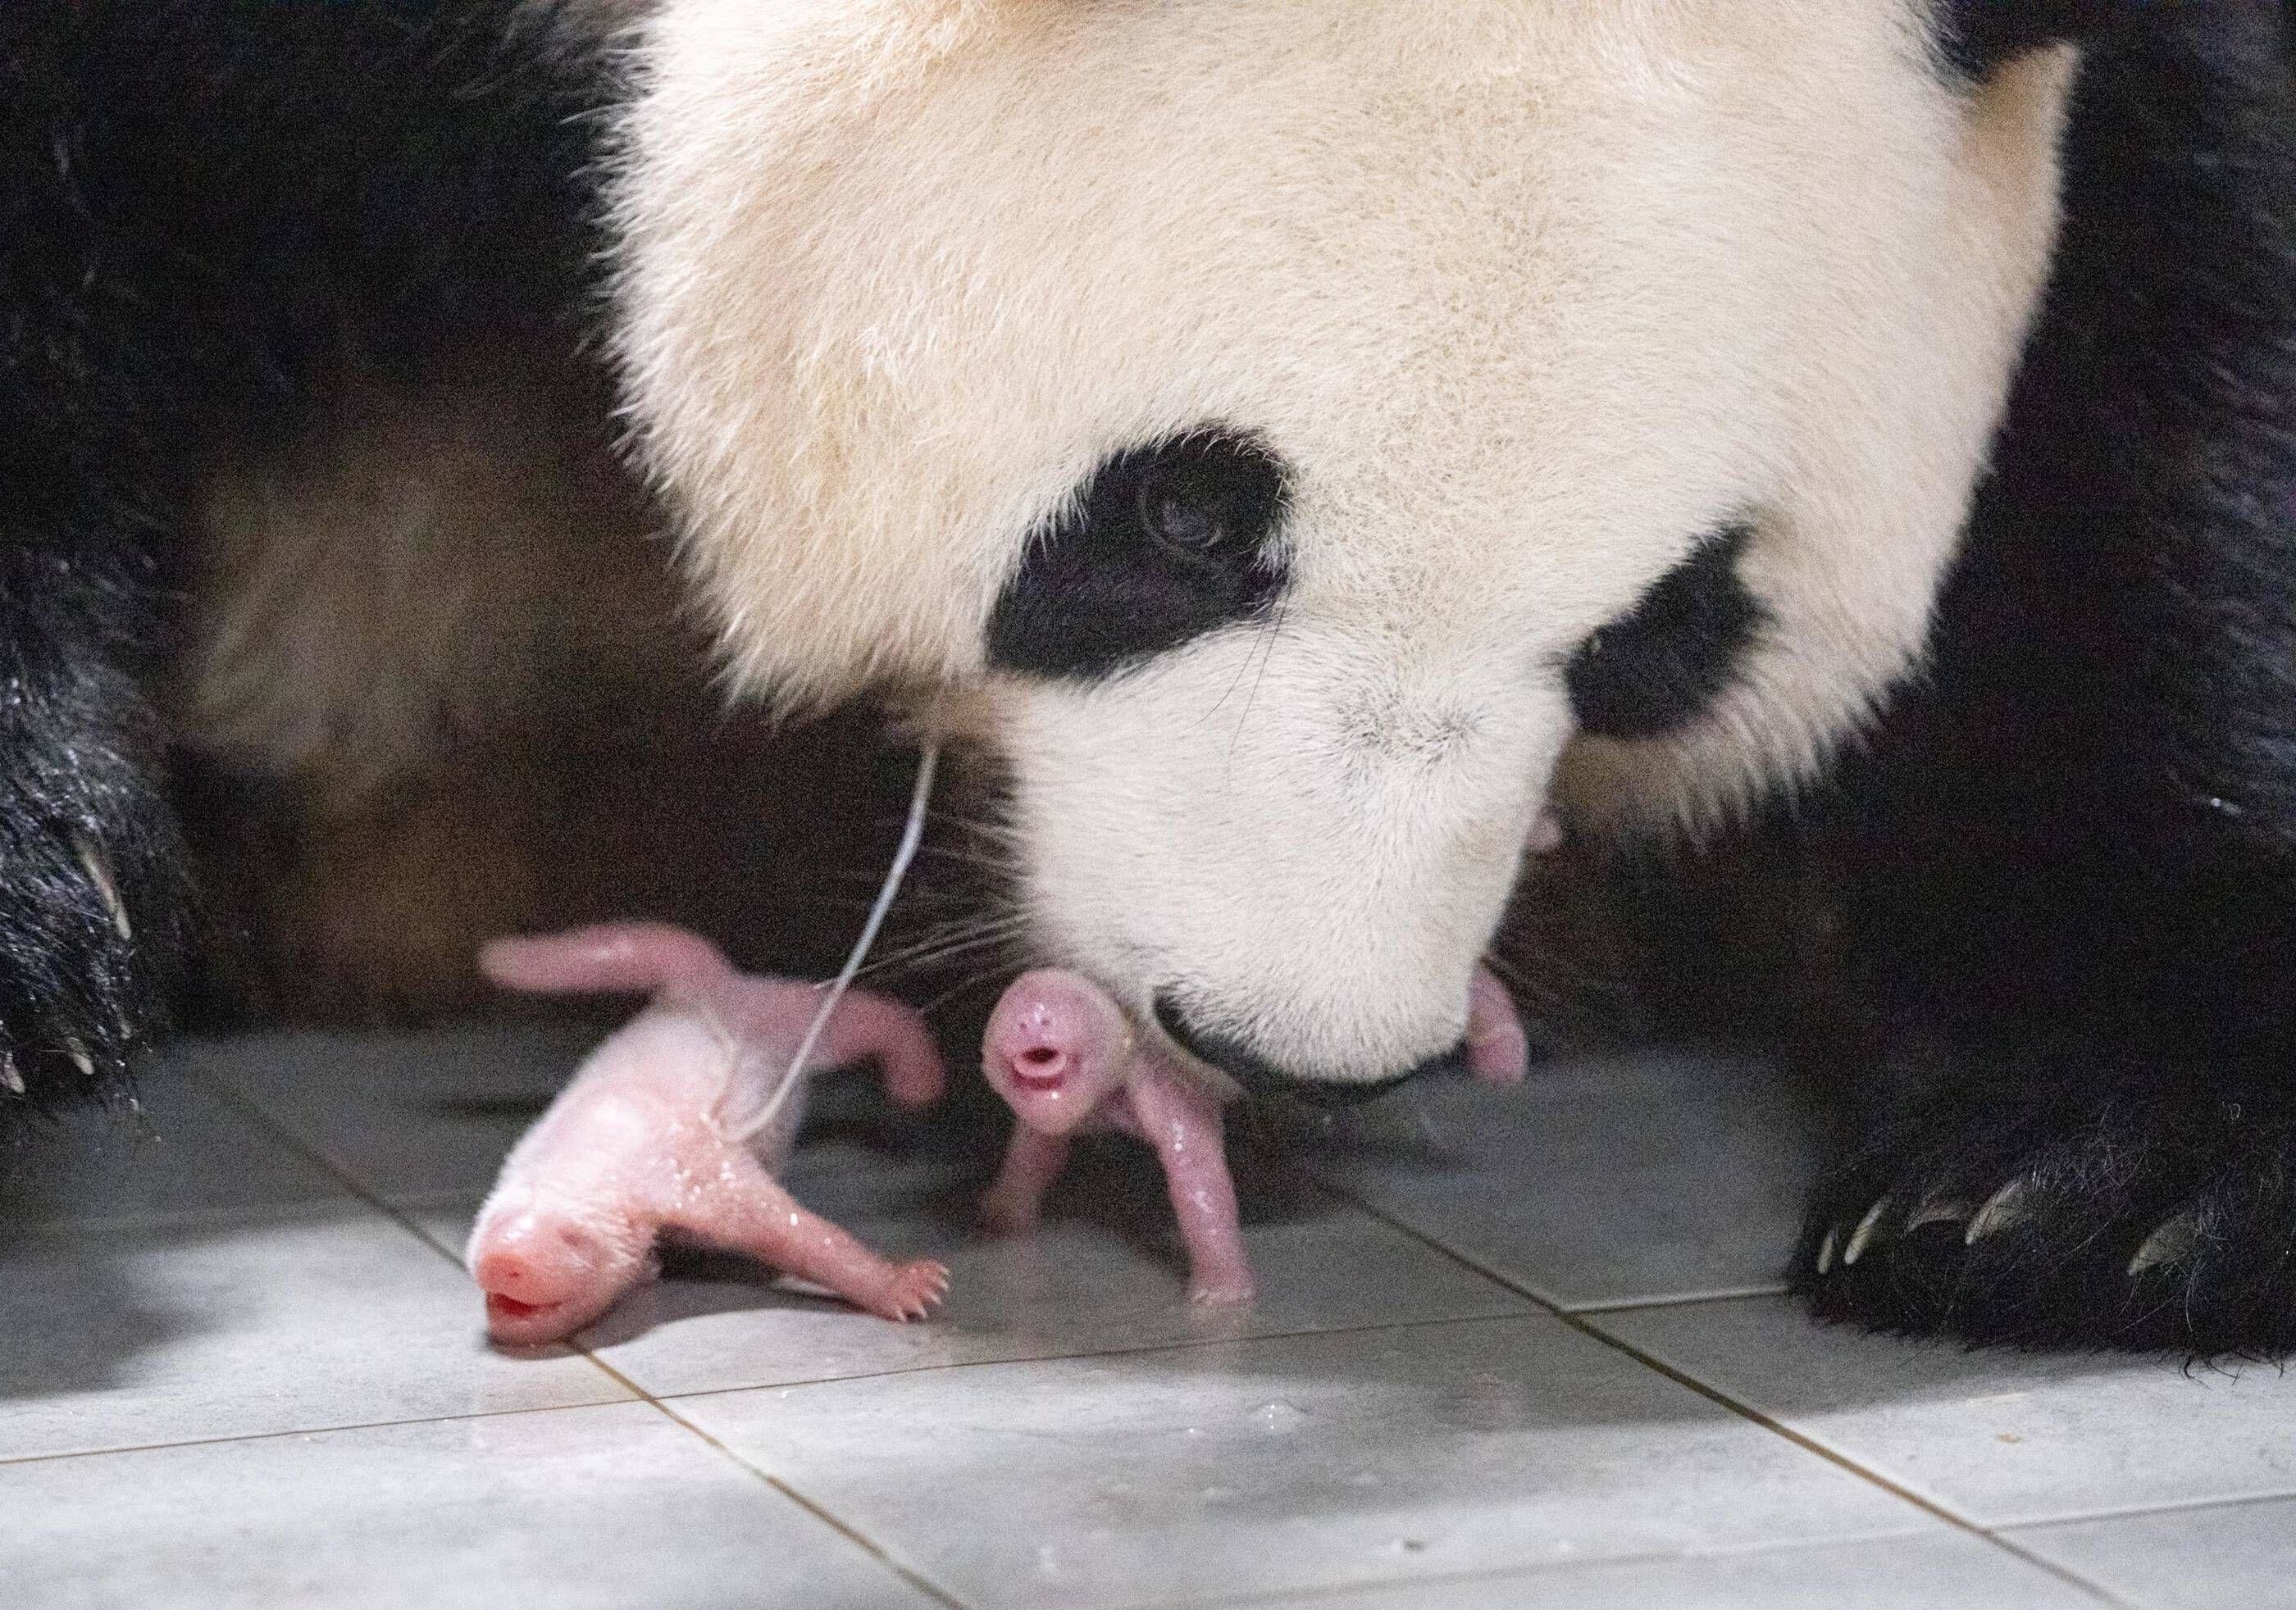 Two tiny hairless, pink babies on the floor in front of a giant panda, whose face is many times bigger than both of them